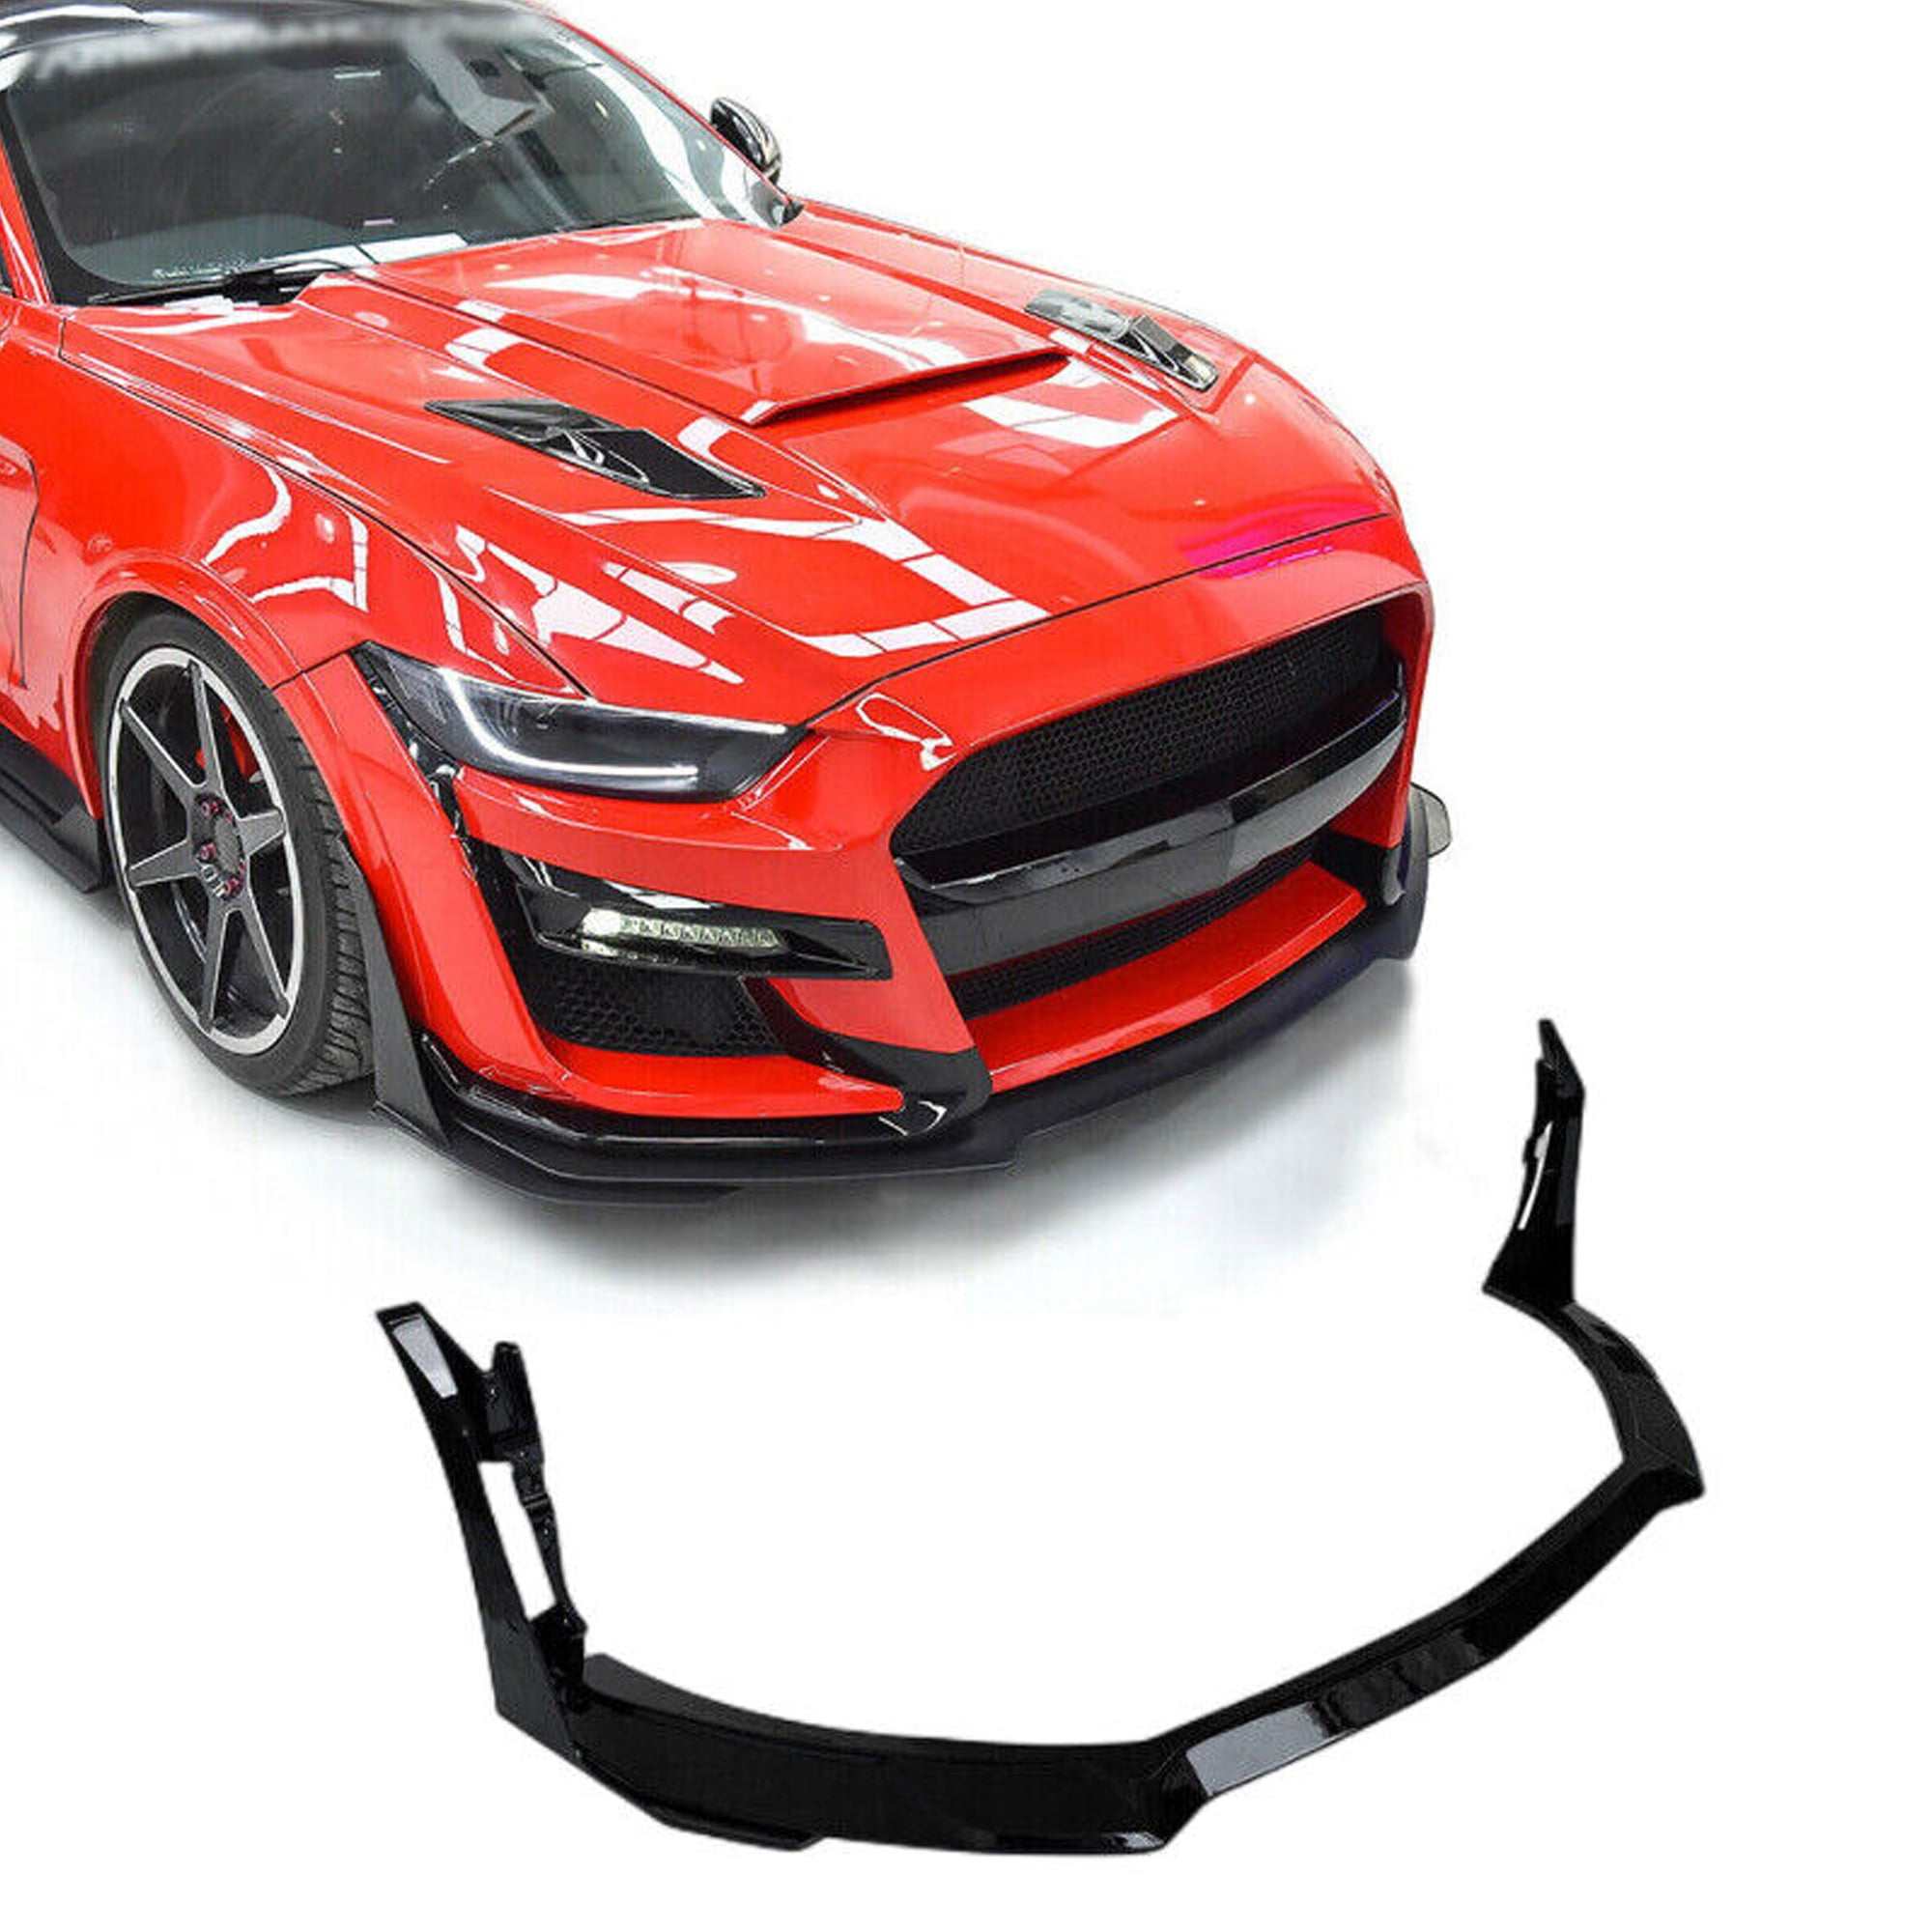 Auto Frontlippe Frontspoiler für Ford Mustang 2015 2016 2017, Auto